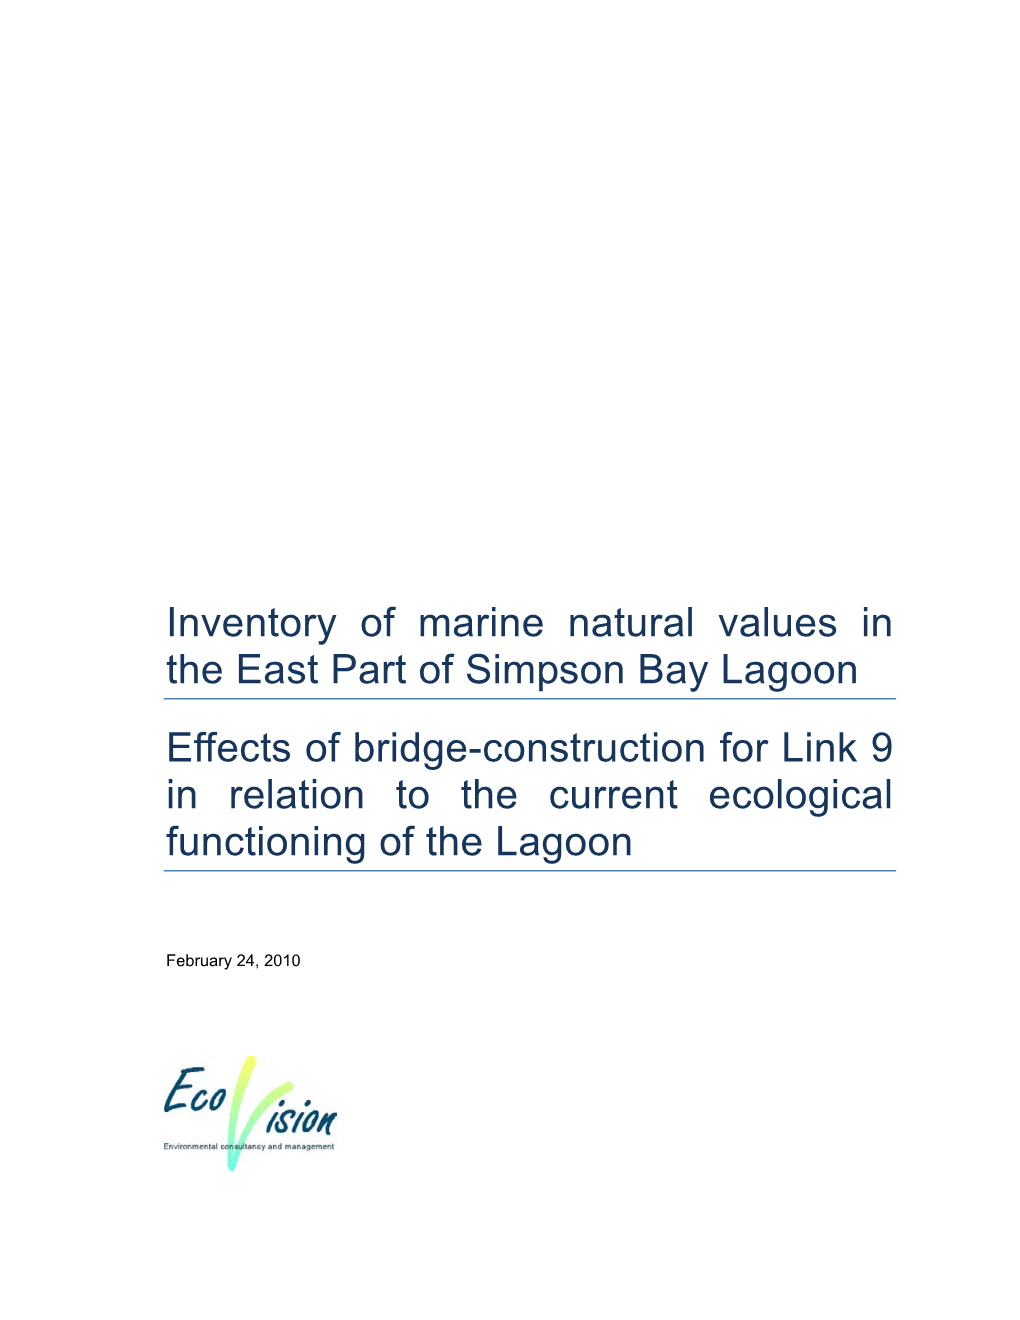 (Ecovision, 2010) Inventory of Marine Natural Values in the East Part of Simpson Bay Lagoon